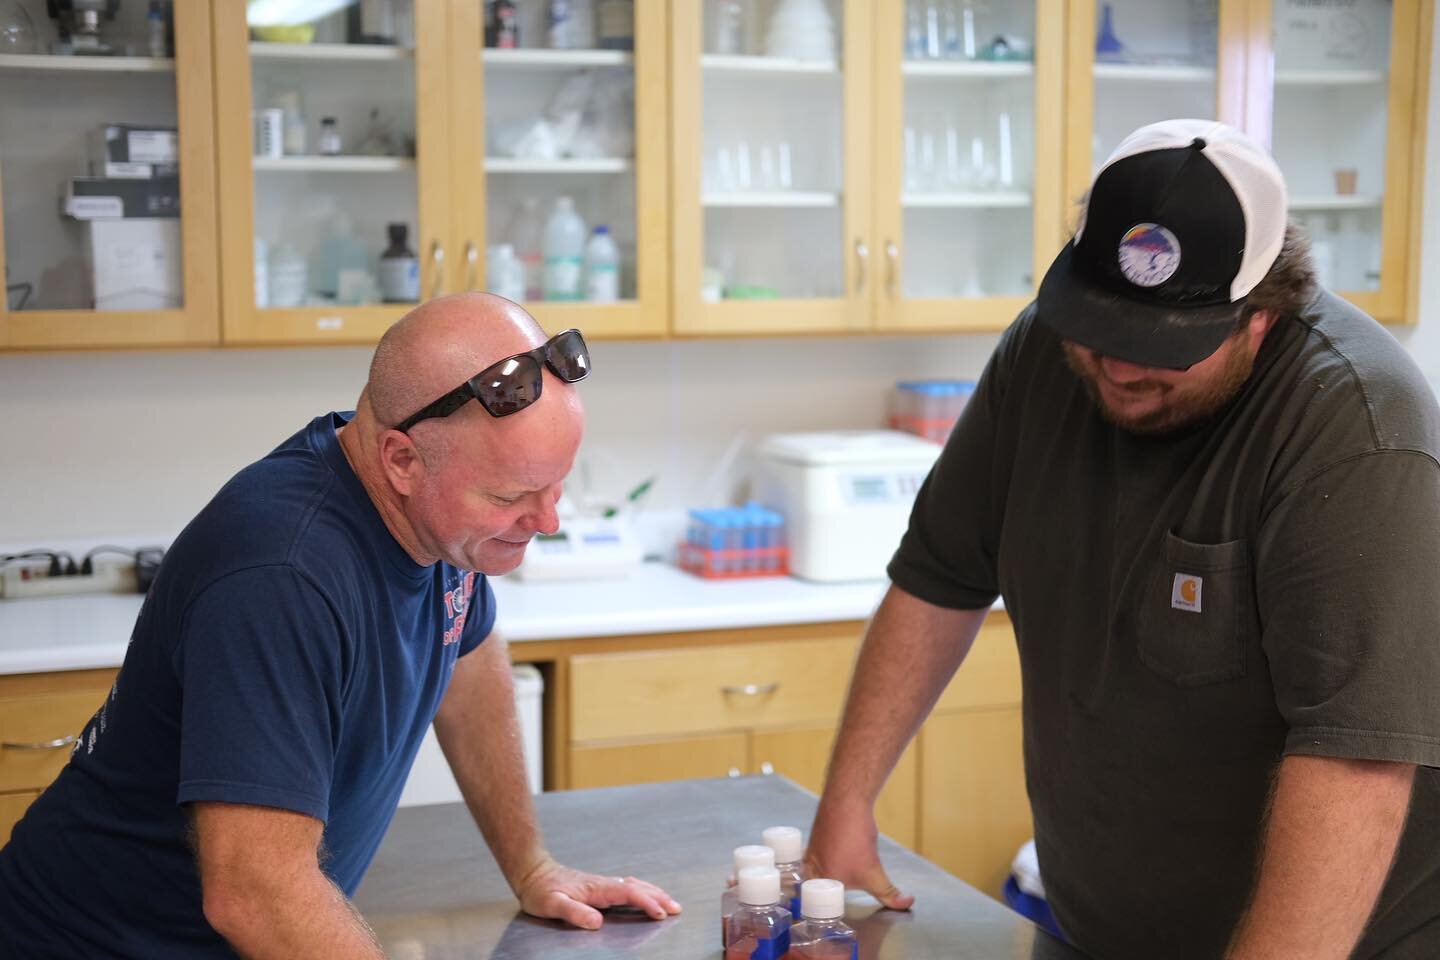 Find someone who looks at you the way Drew &amp; Jake look at our juice samples🥰
-
-
-
-
-
#almostthere #harvest2022 #sampling #winegrowing #winemaking #peachycanyonwinery #peachycanyonwines #truelove #winemaker #pasowine #pasowinecountry #pasoroble